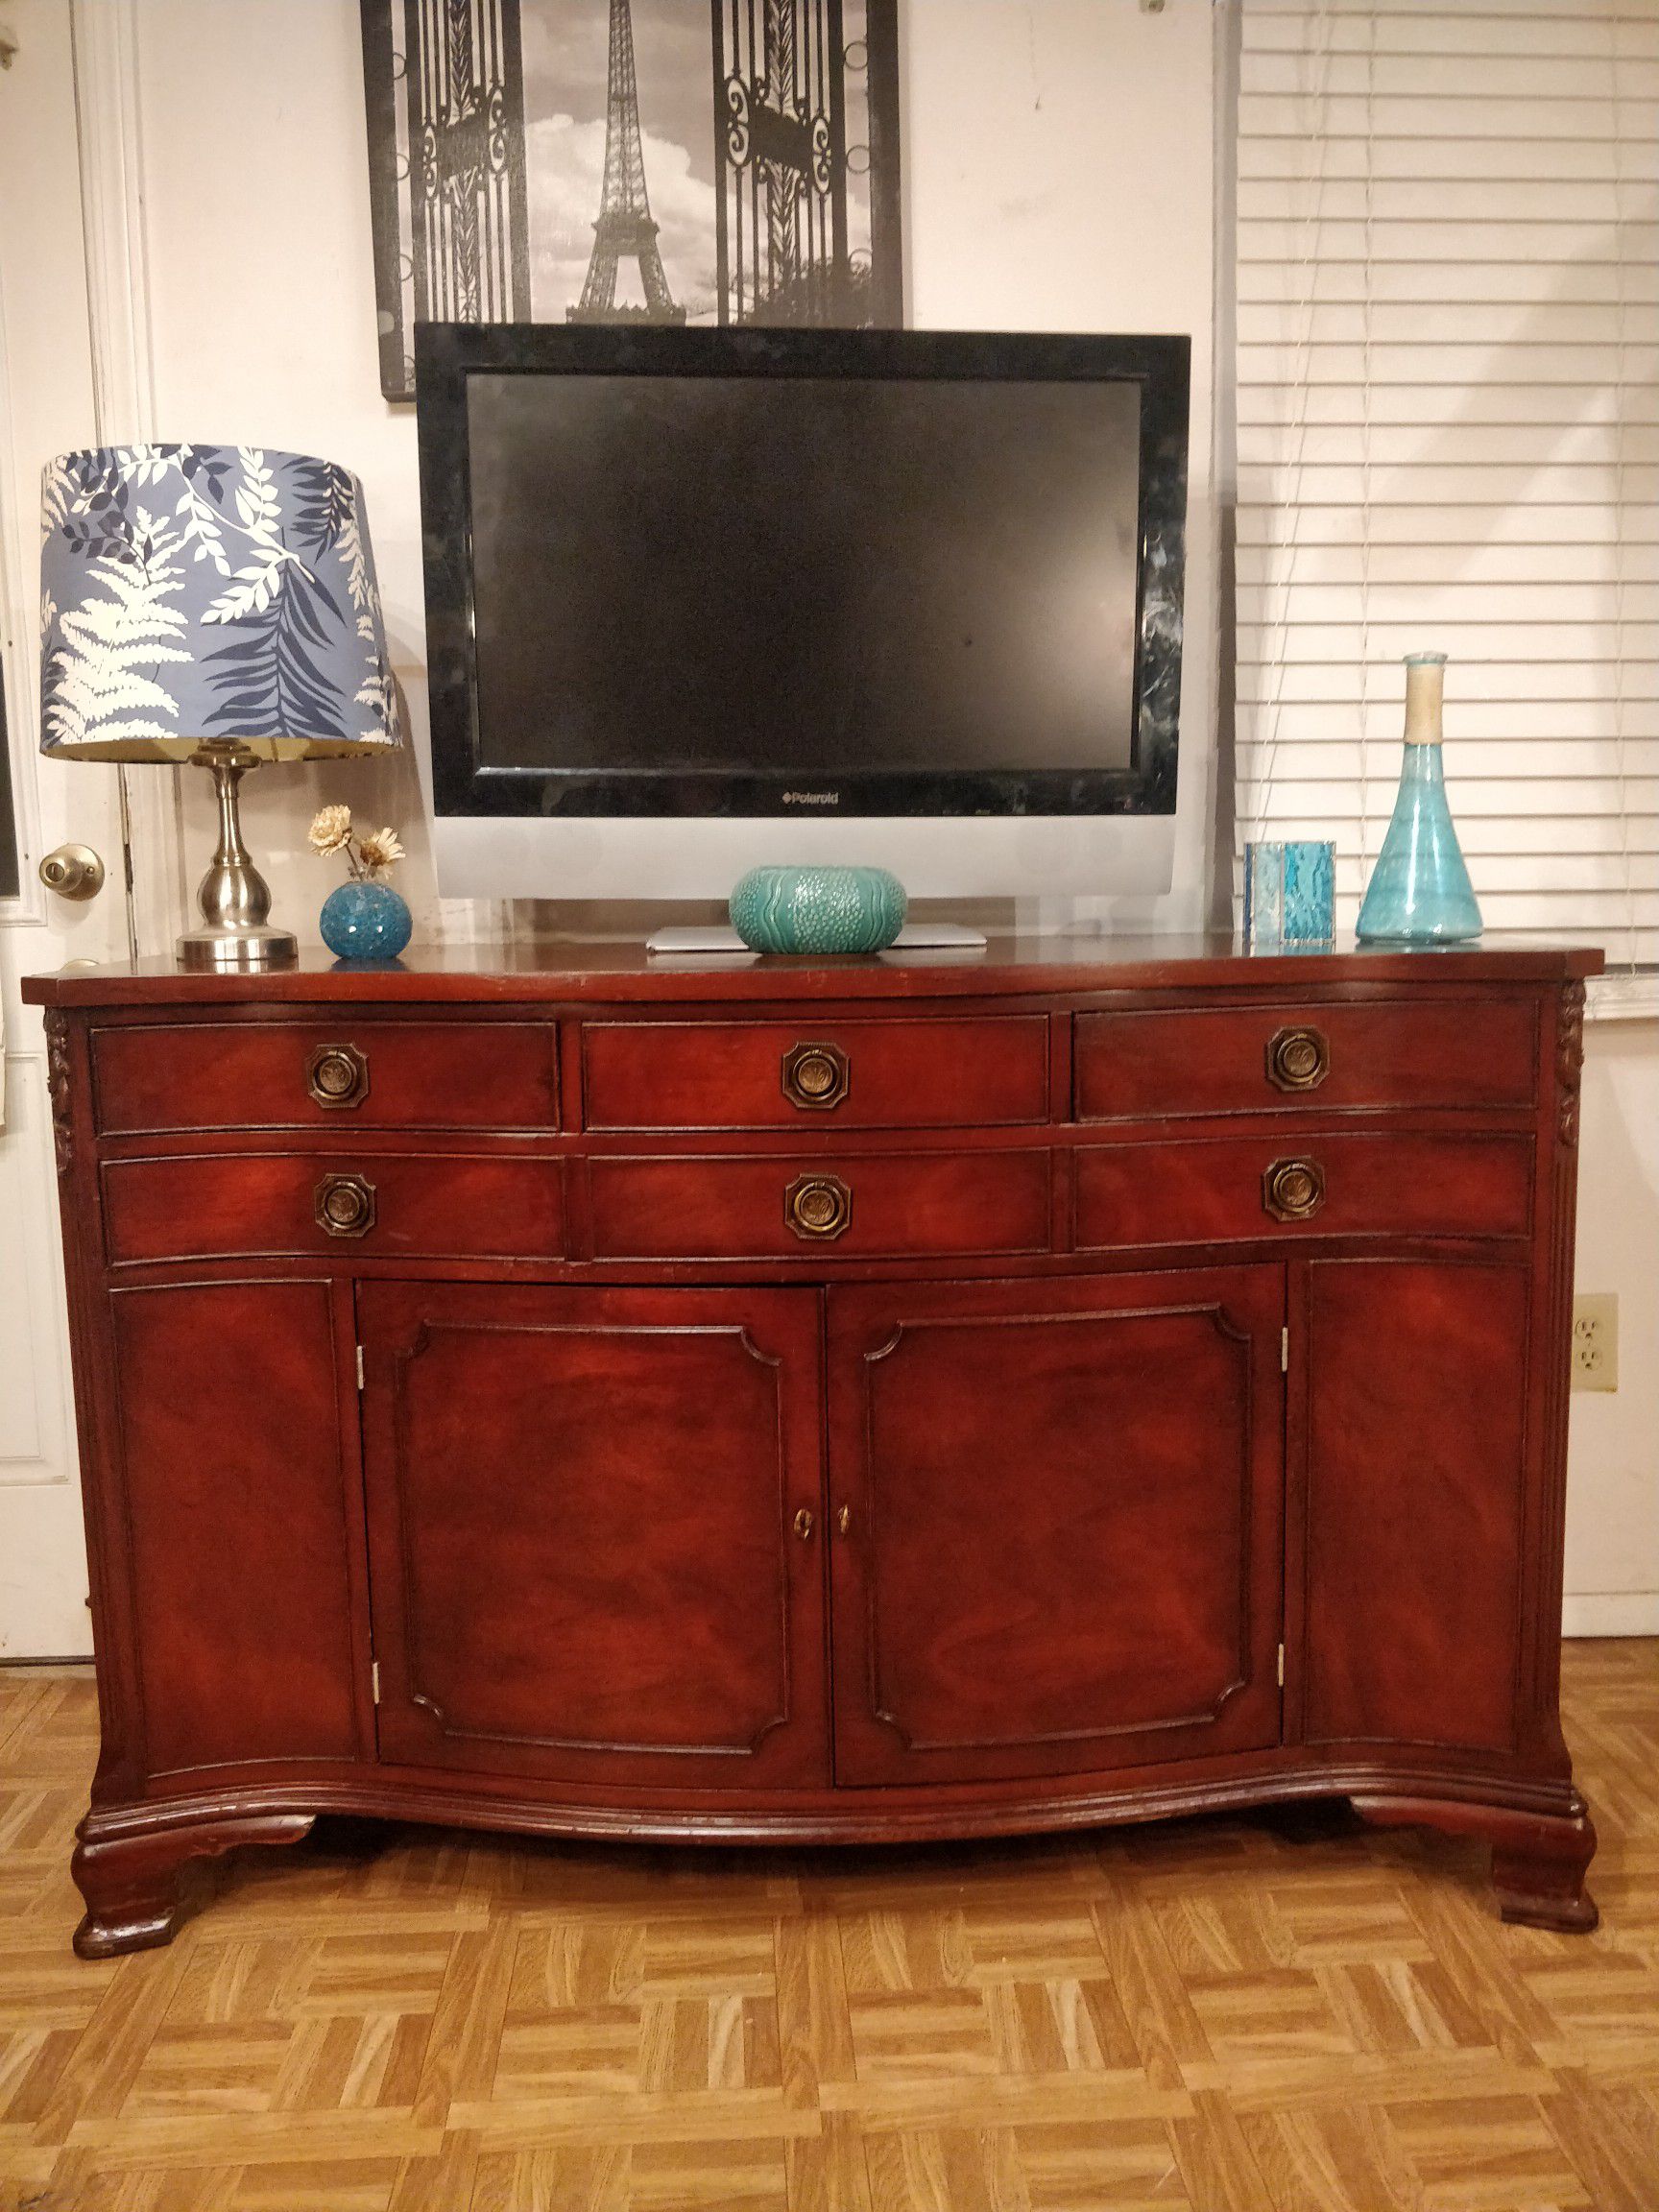 Solid wood MORGANTON buffet/TV stand with drawers, shelves & 2 doors cabinet, all drawers working well dovetail drawers, let me kno